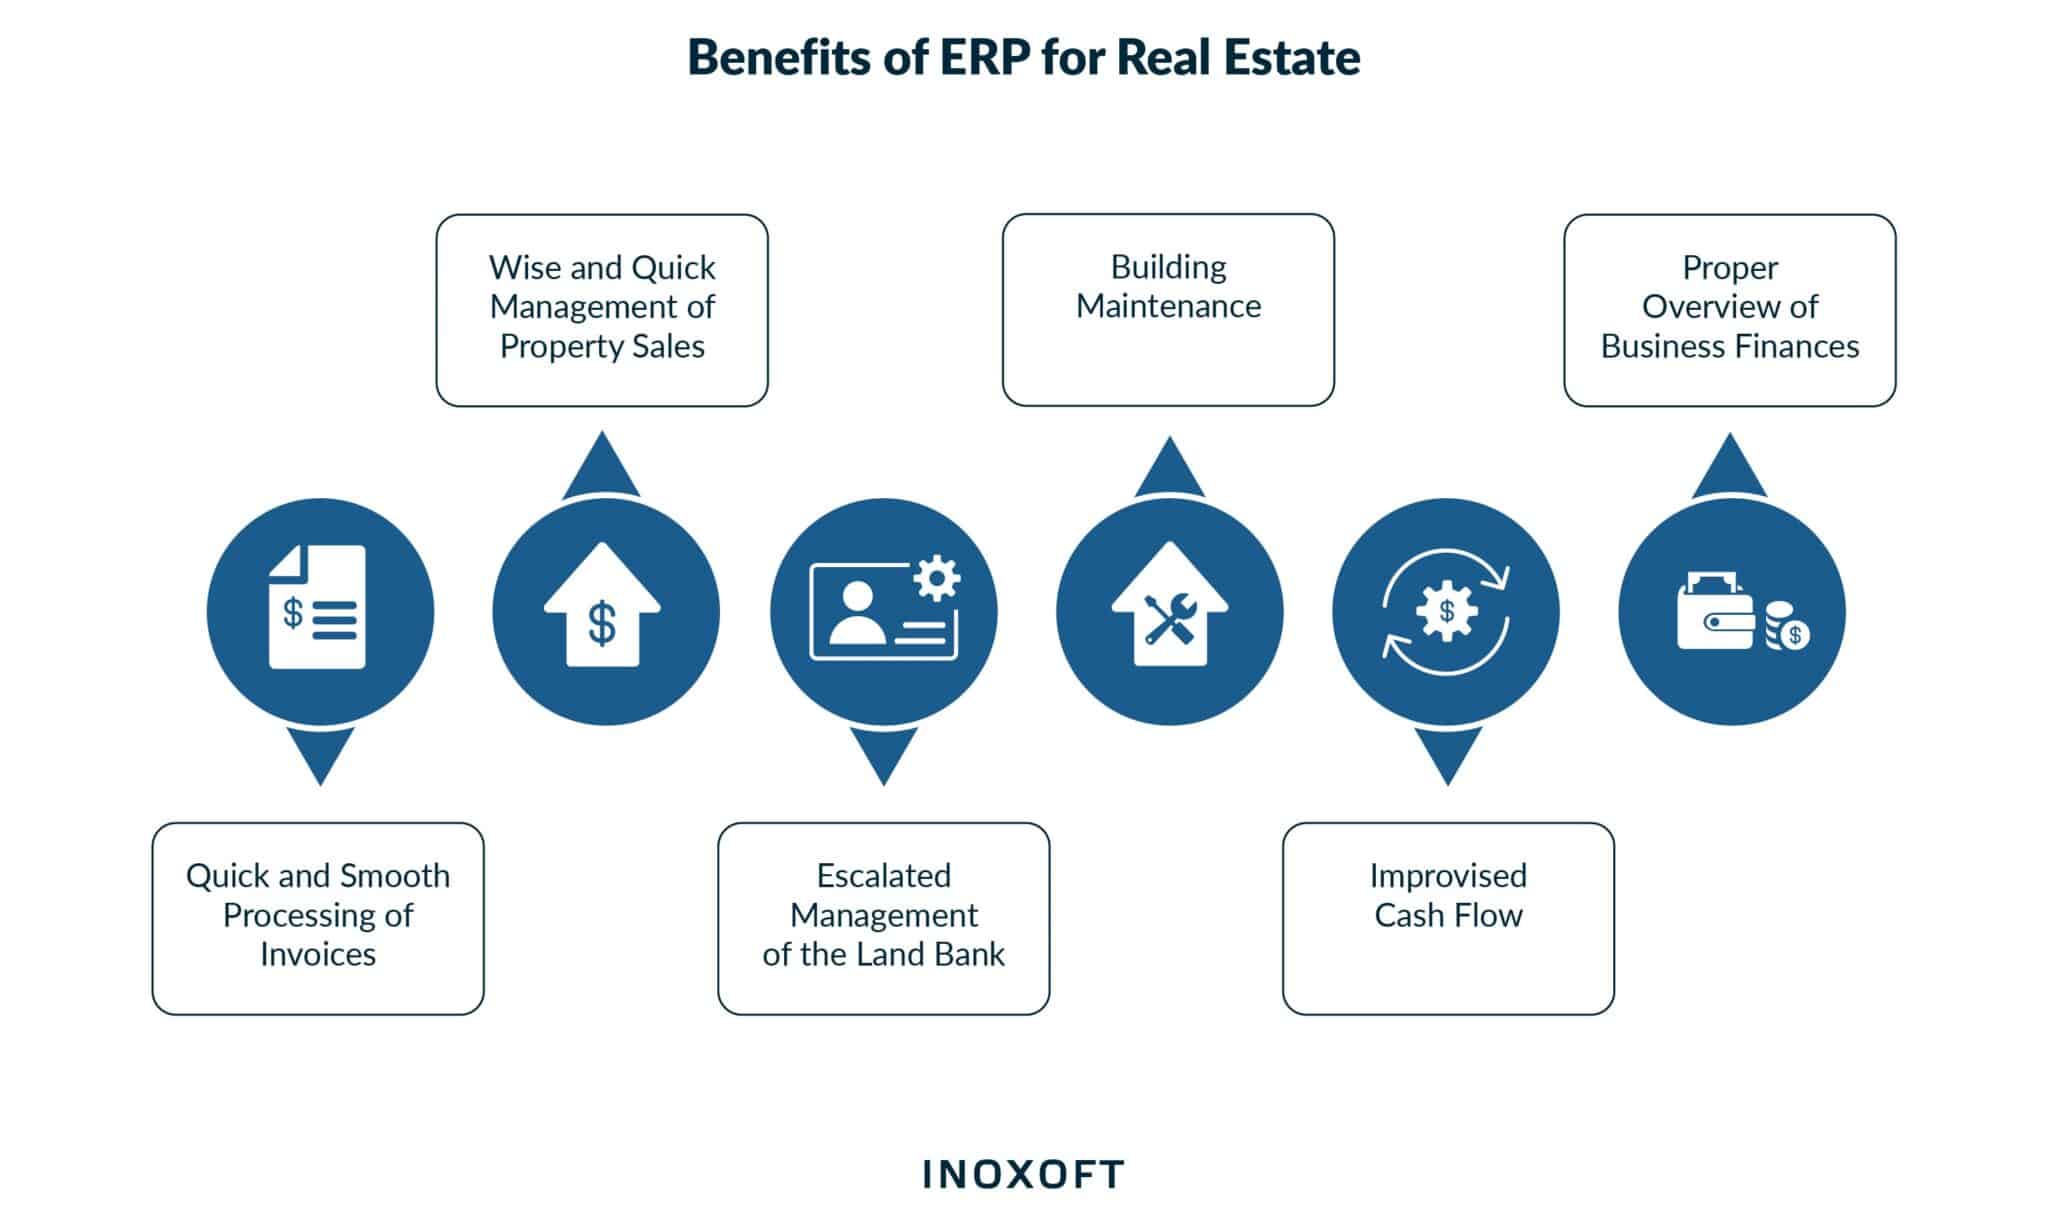 Benefits of ERP for real estate business